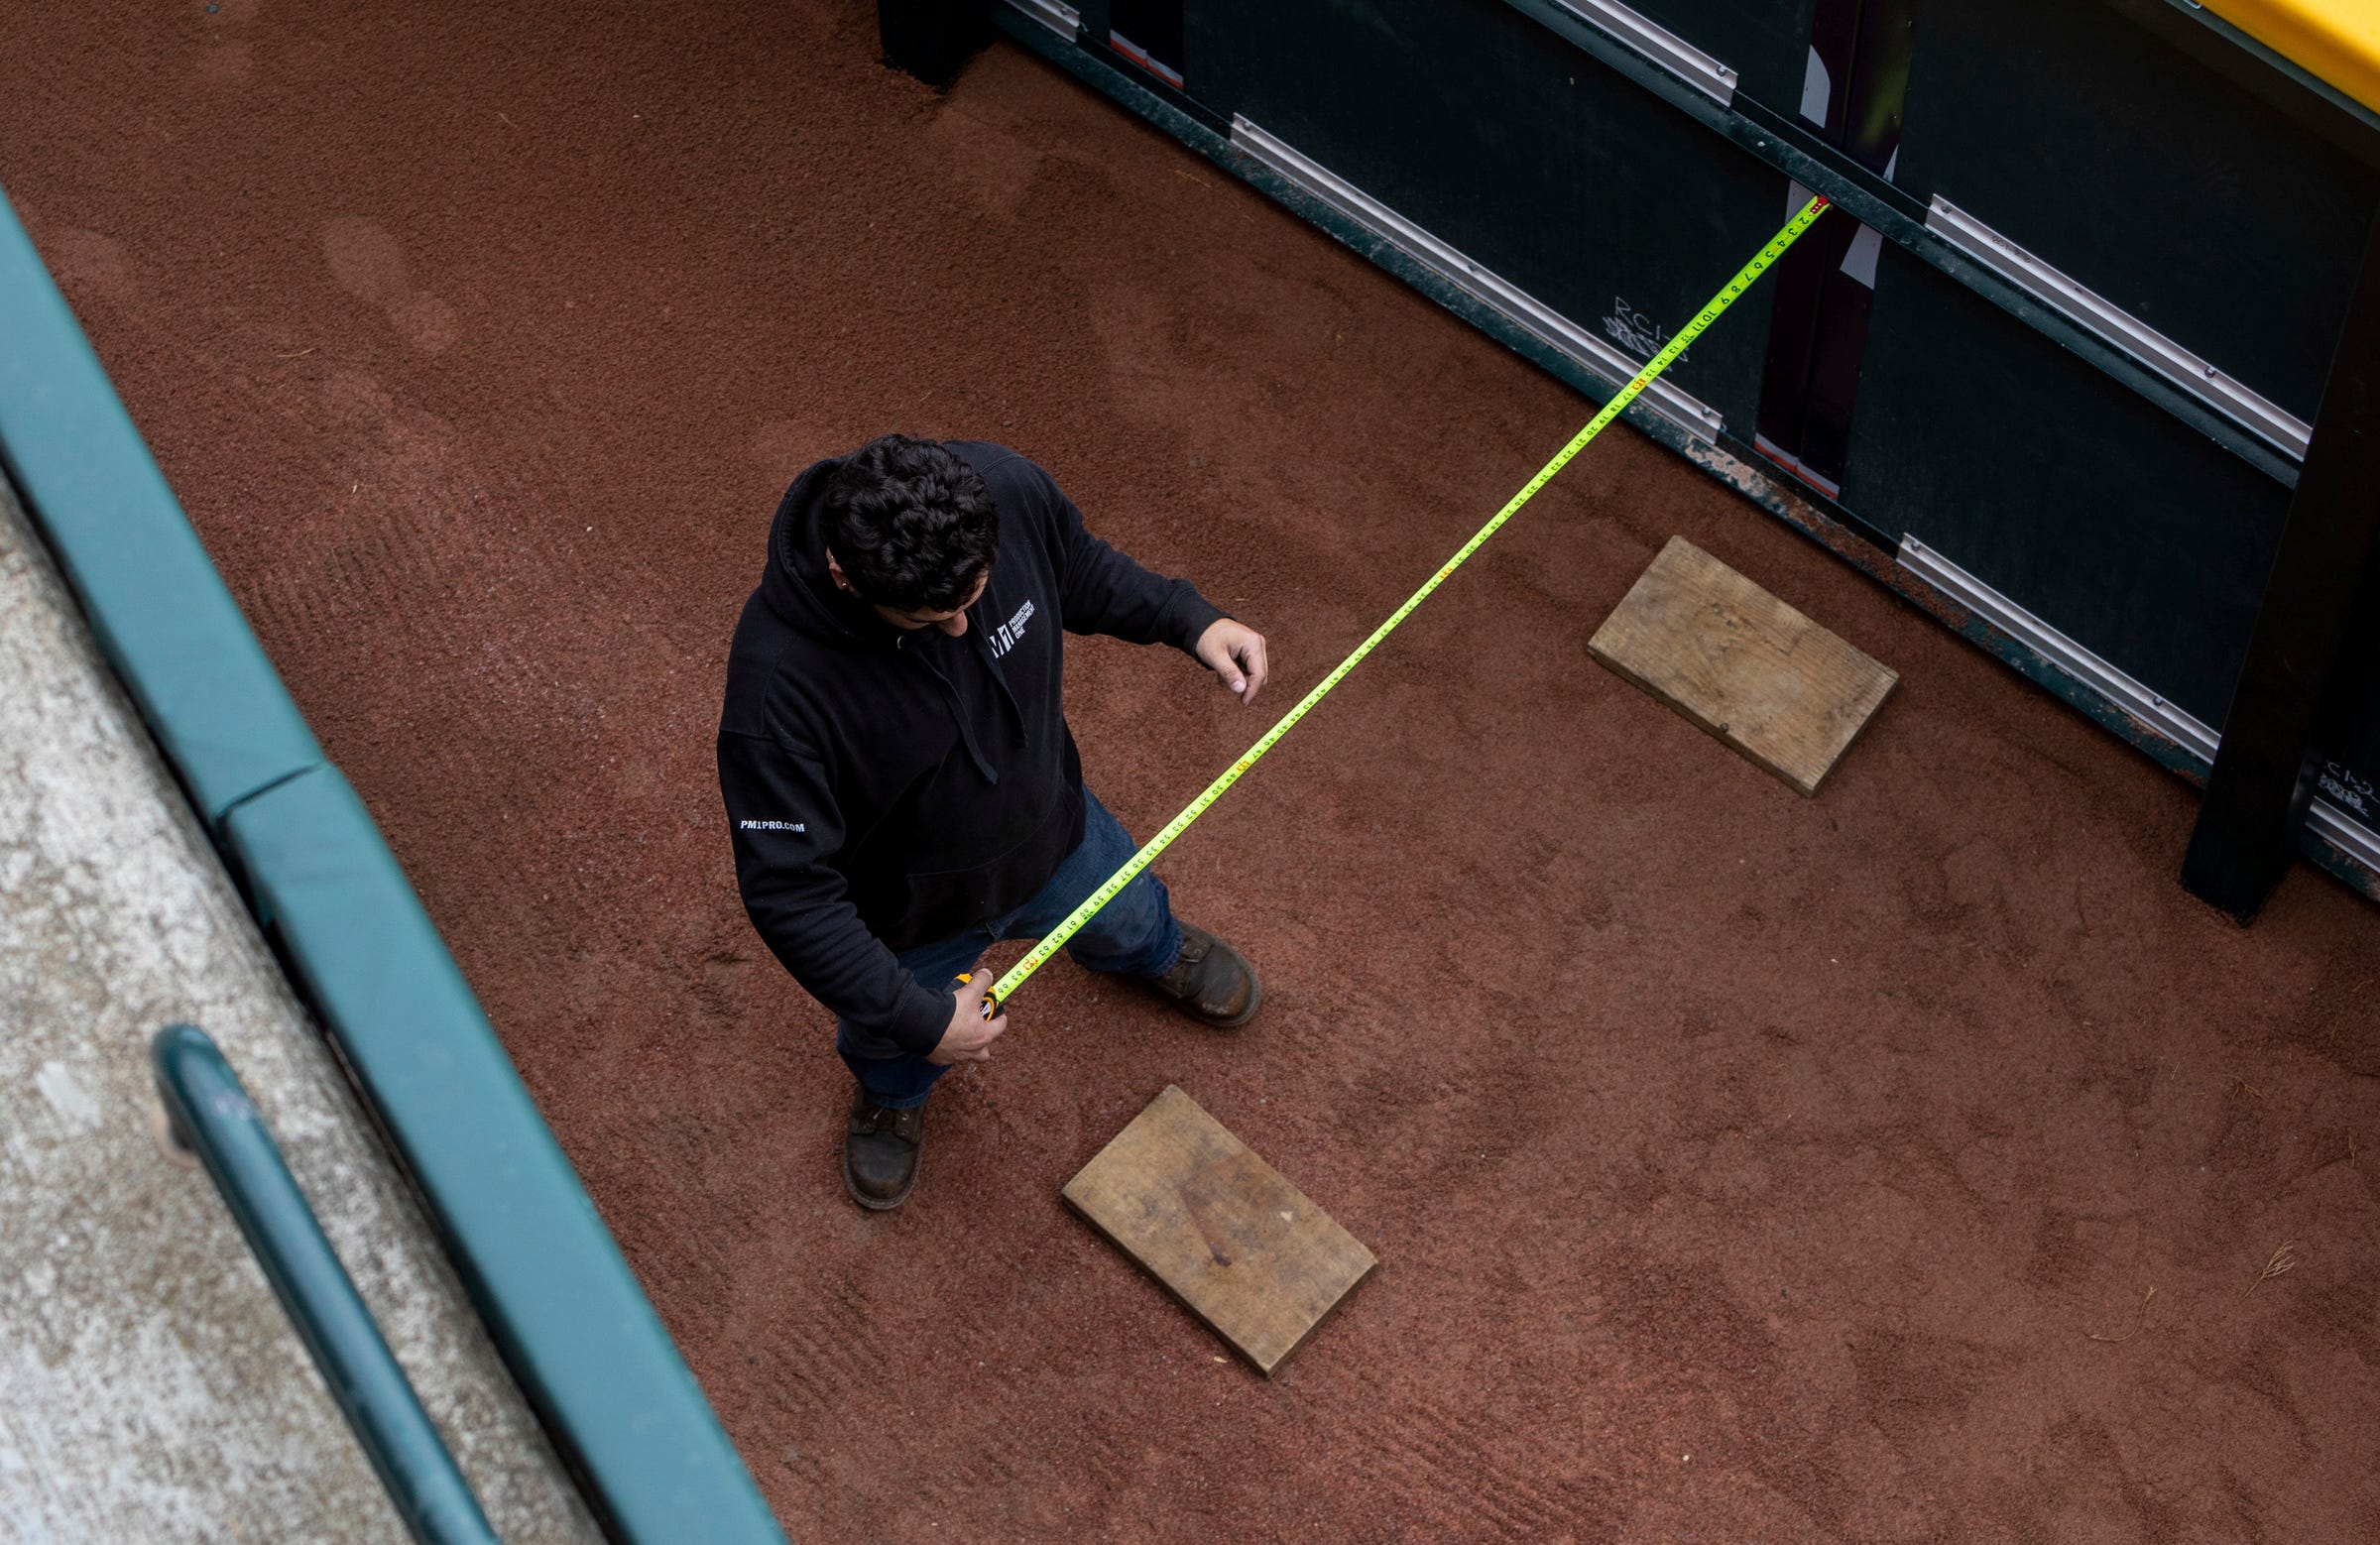 Michael Pate measures an area for a stage he will build behind the outfield wall in Comerica Park during Opening Day preparations on Wednesday, April 5, 2023.